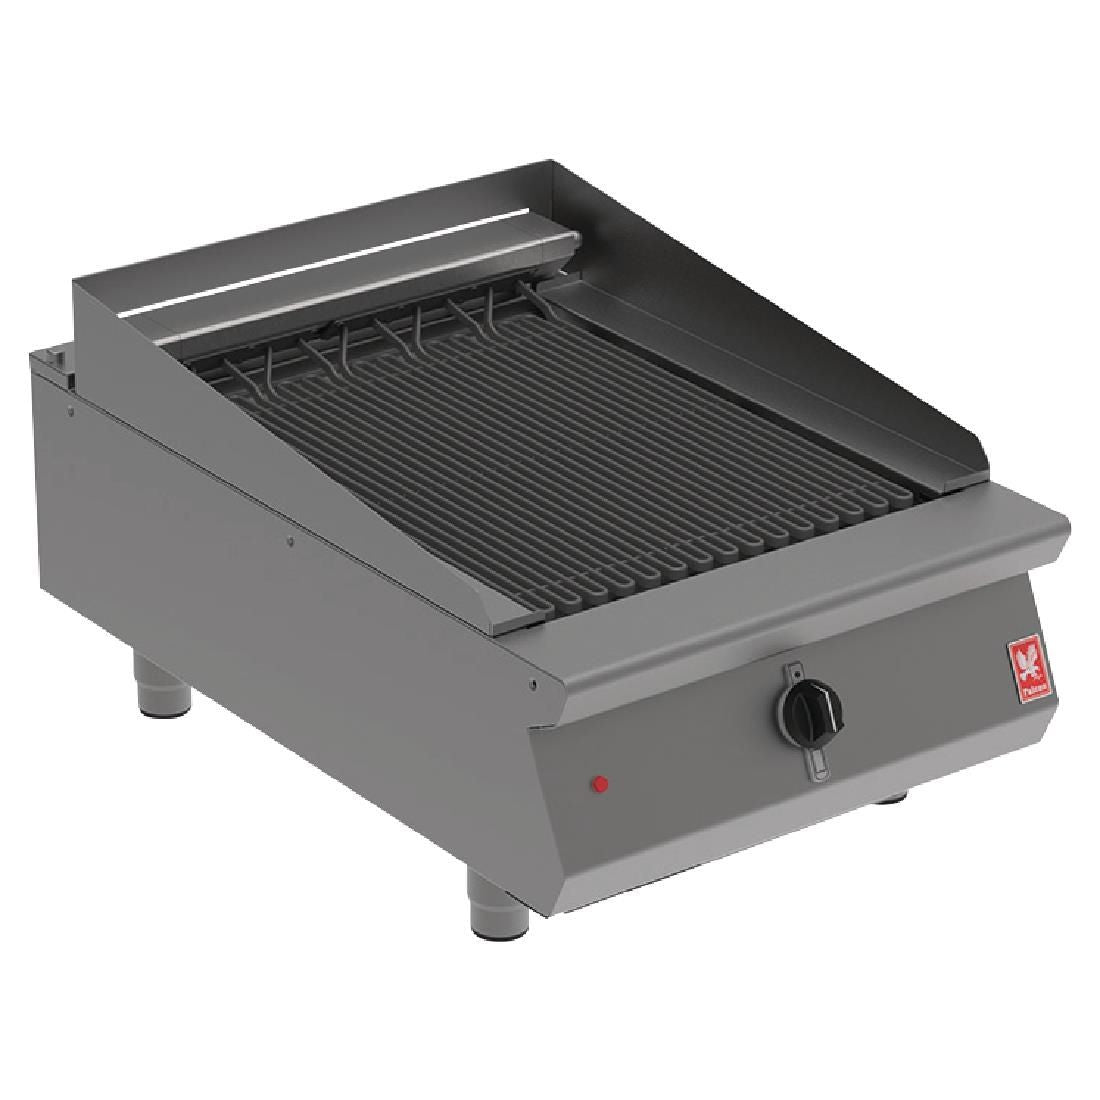 Falcon F900 Electric Chargrill E9460 JD Catering Equipment Solutions Ltd